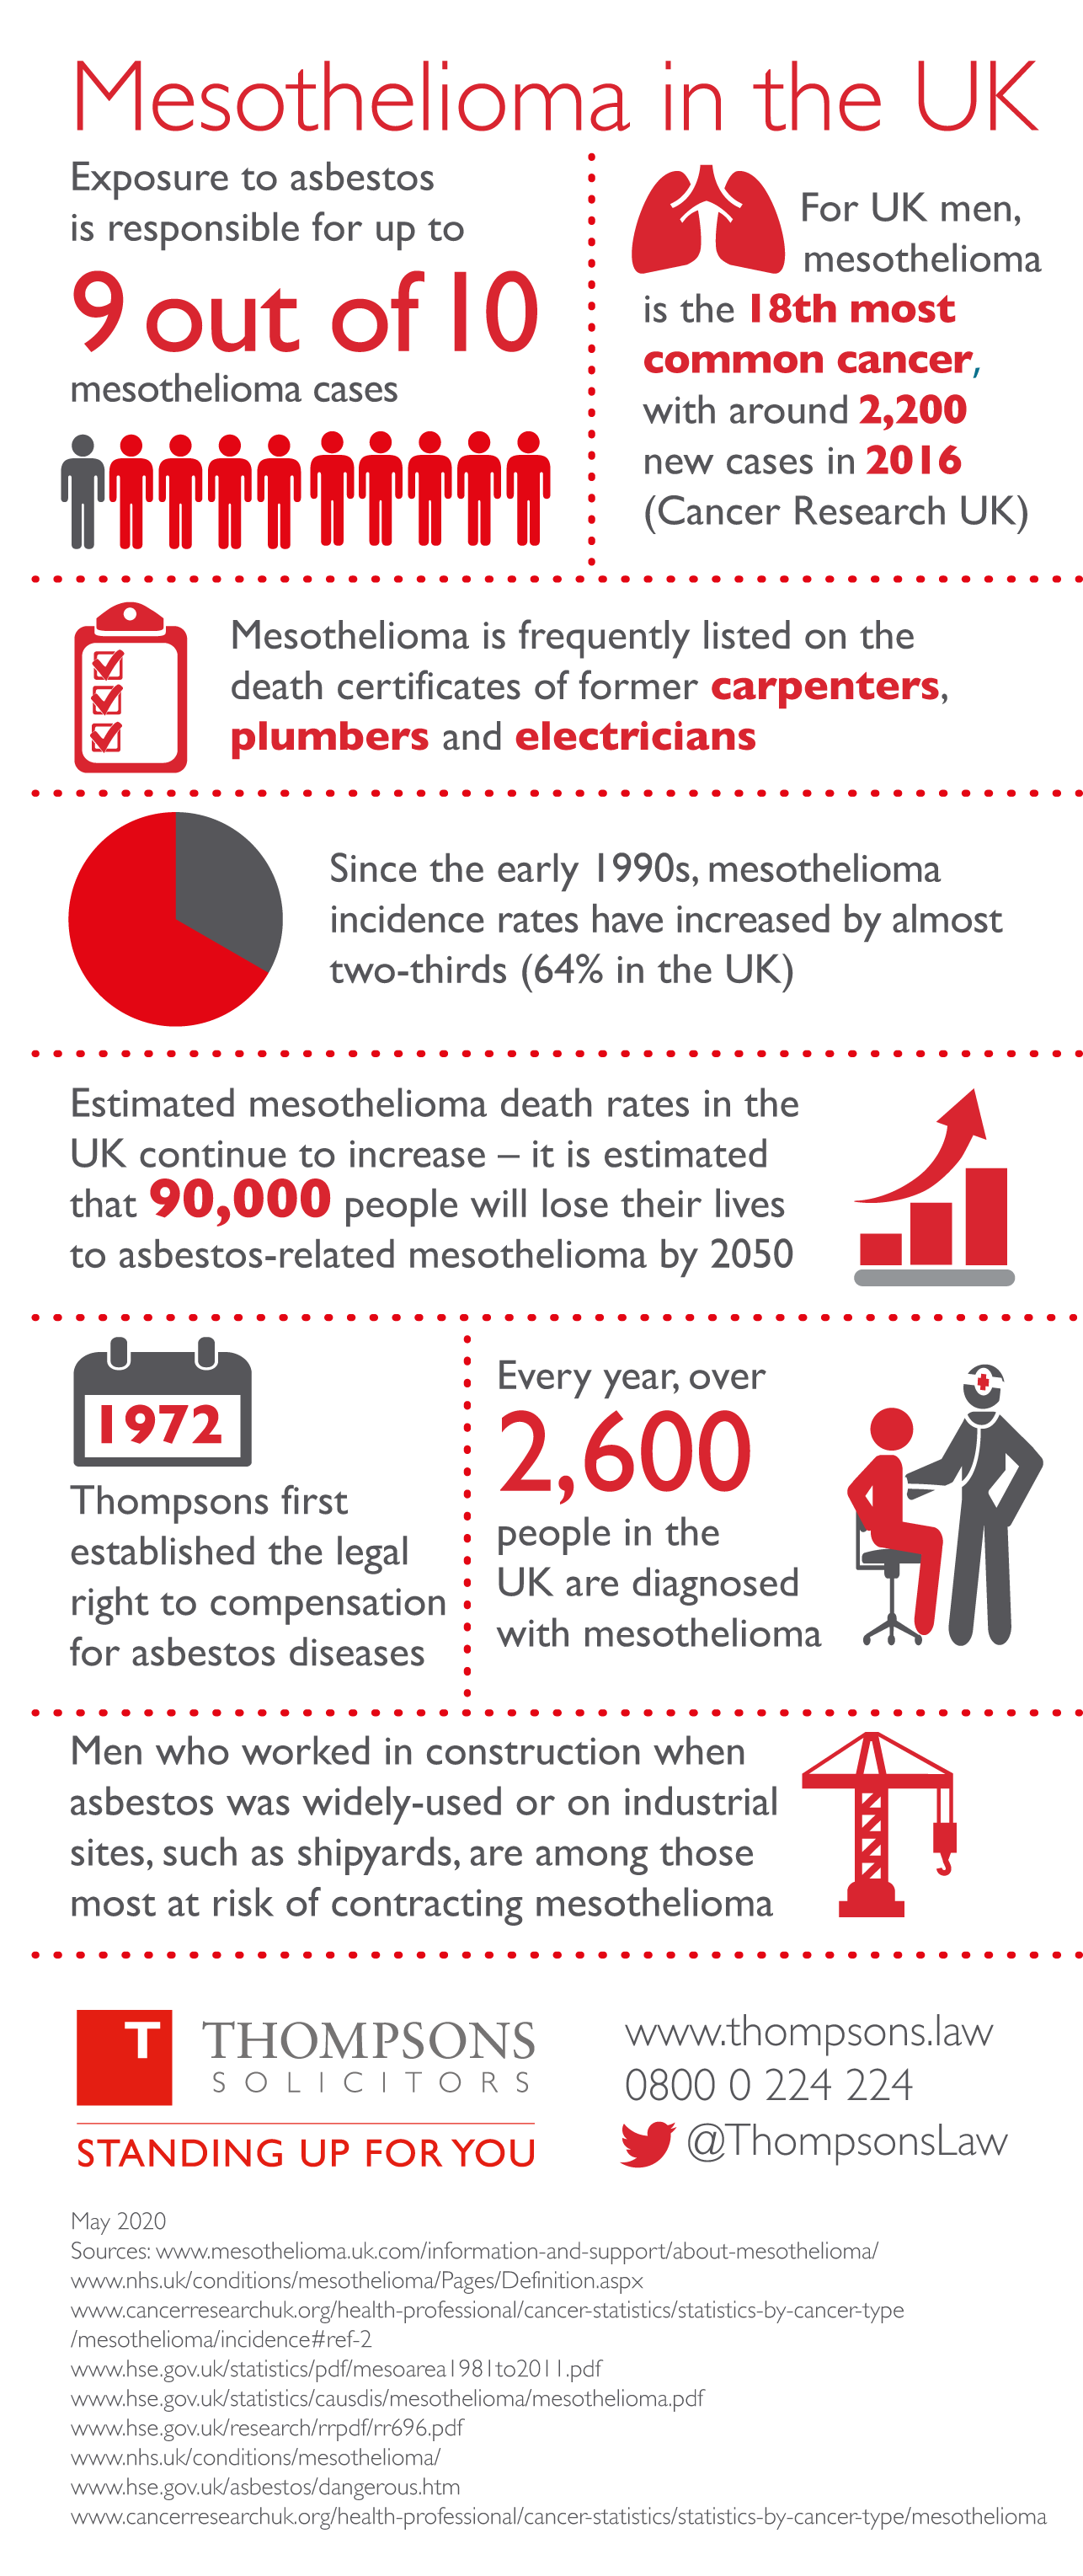 An infographic by asbestos disease specialists, Thompsons Solicitors, detailing the key facts about mesothelioma.